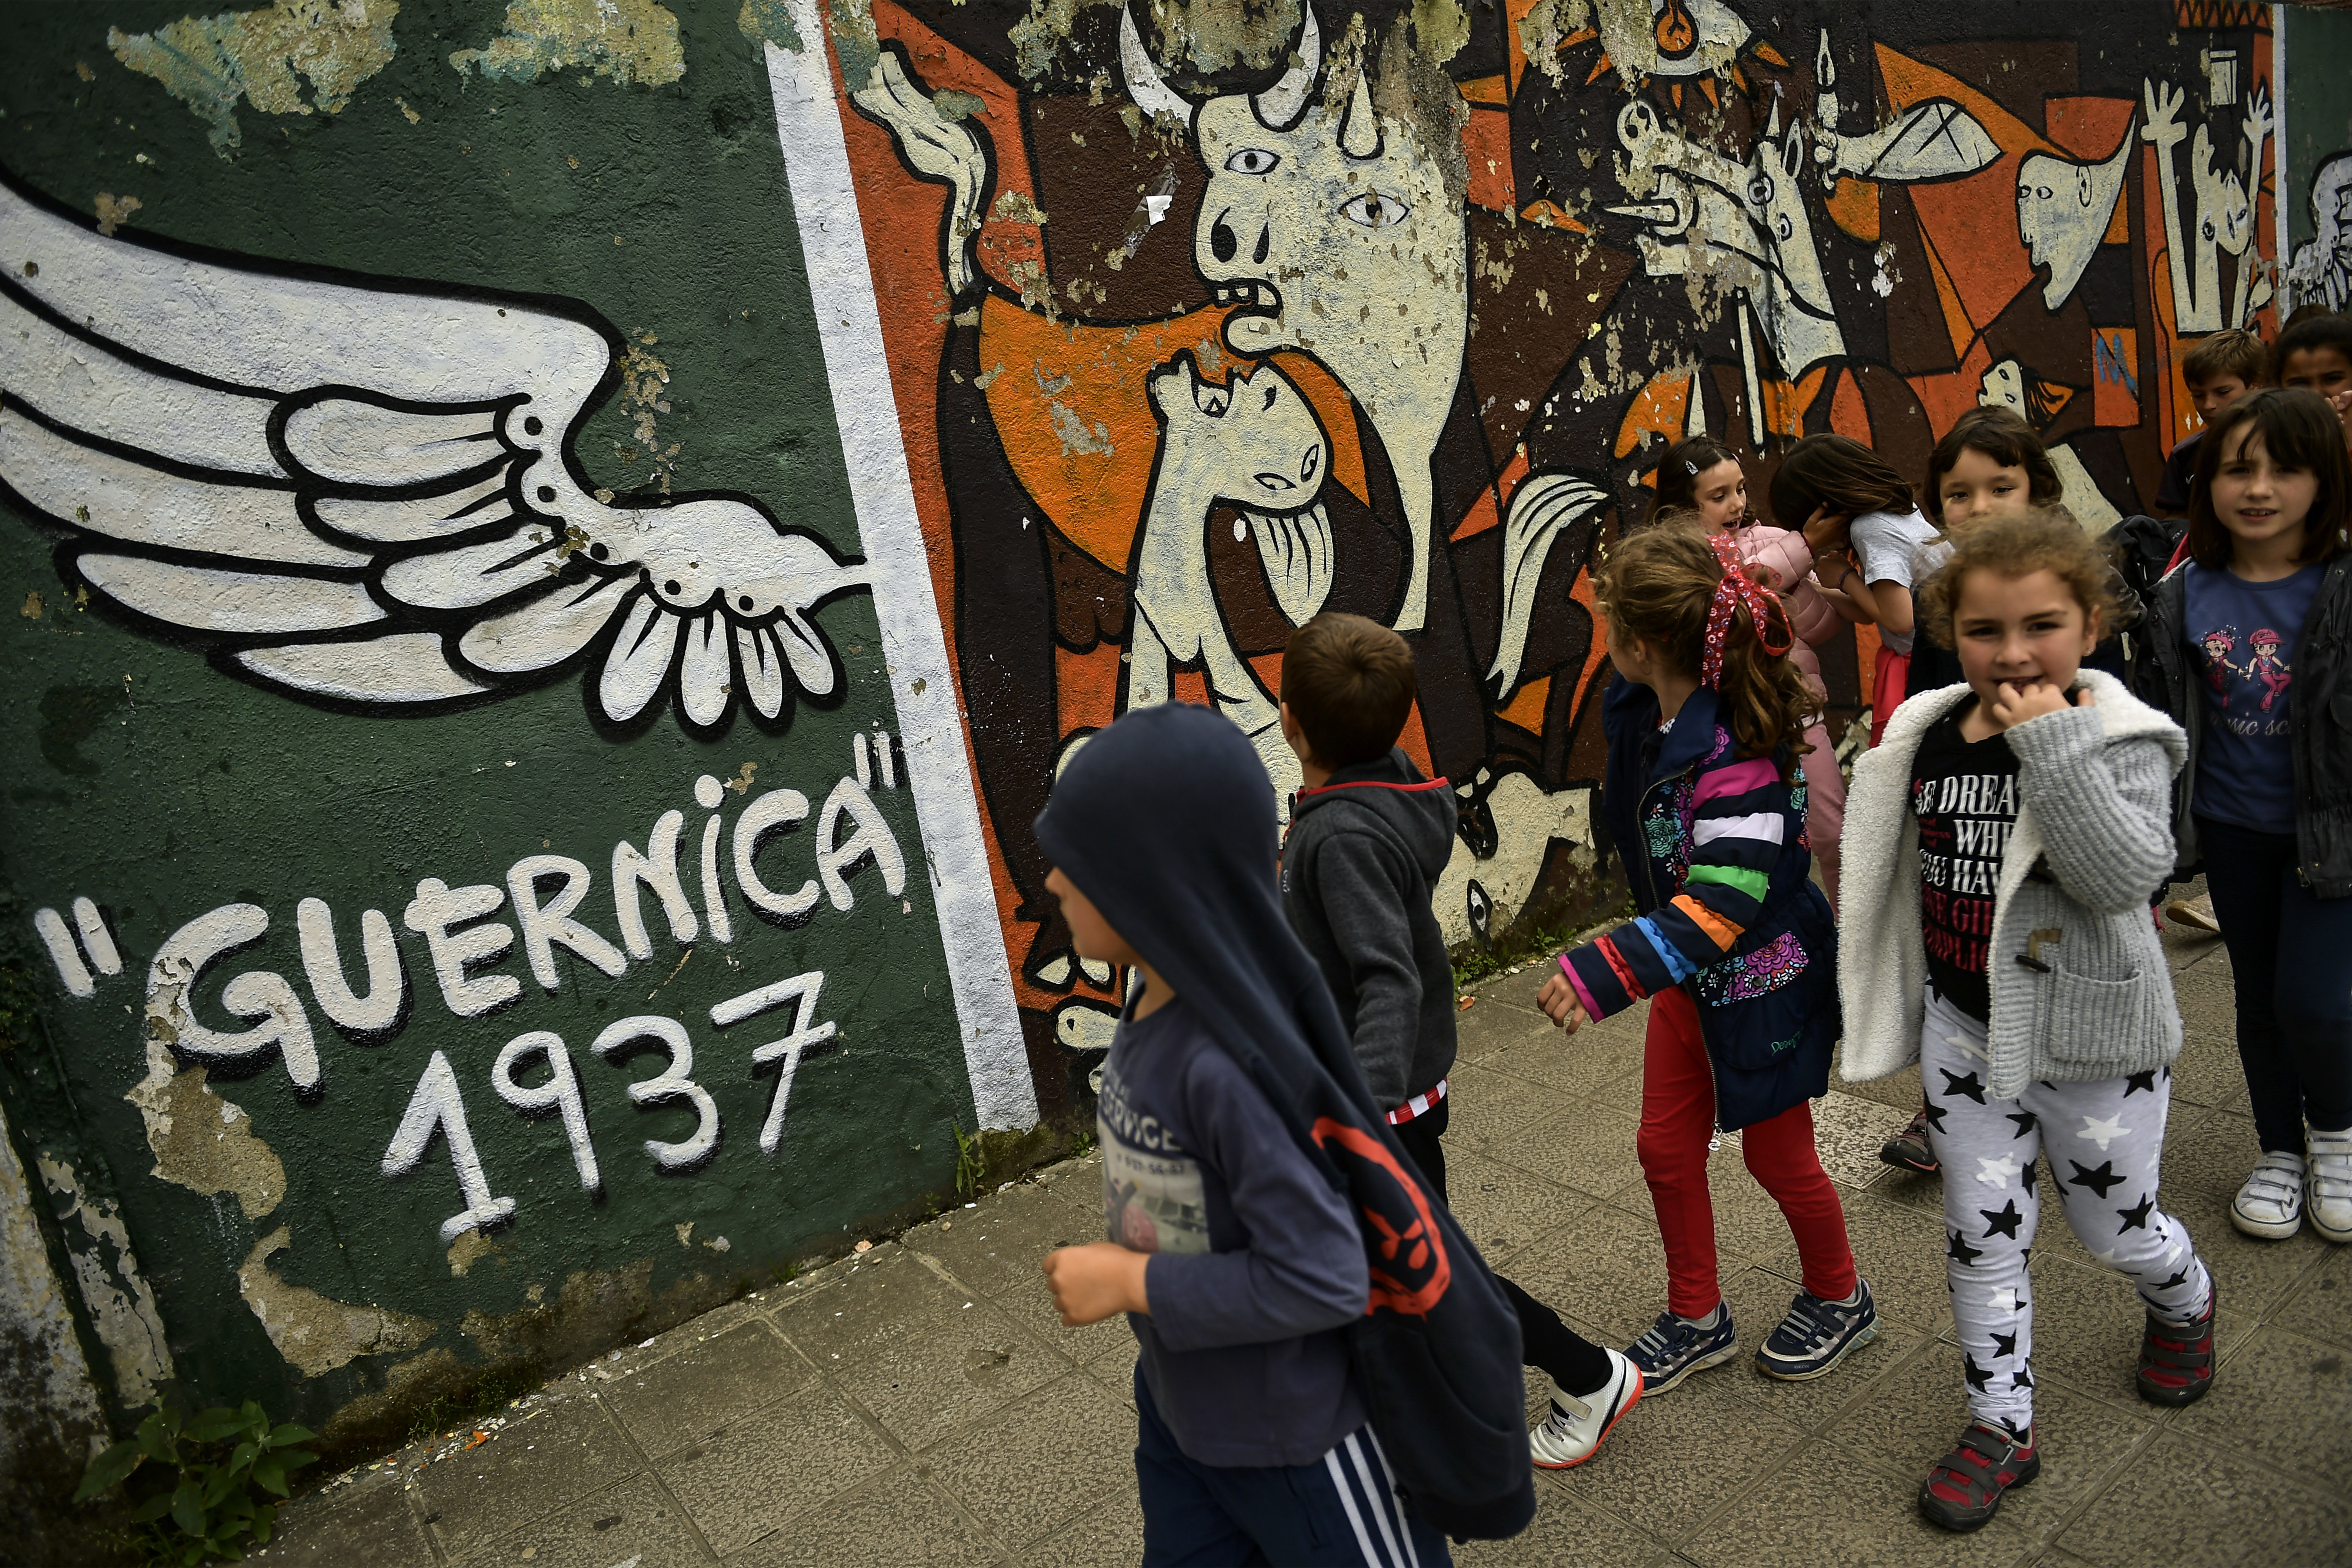 A group of young girls and boys walk past a wall with the Pablo Picasso's painting in tribute for all people killed in the Spanish Civil War, in Guernica, northern Spain, Thursday, April 26, 2018. The small town was destroyed in an attack by German bombers and thousands of Basque citizens died on this day in 1937. The carnage has ever since stood as a symbol of man's cruelty to his fellow man, immortalized in Pablo Picasso's immense and powerful painting, one of the most iconic works of art of the 20th century. (AP Photo/Alvaro Barrientos)